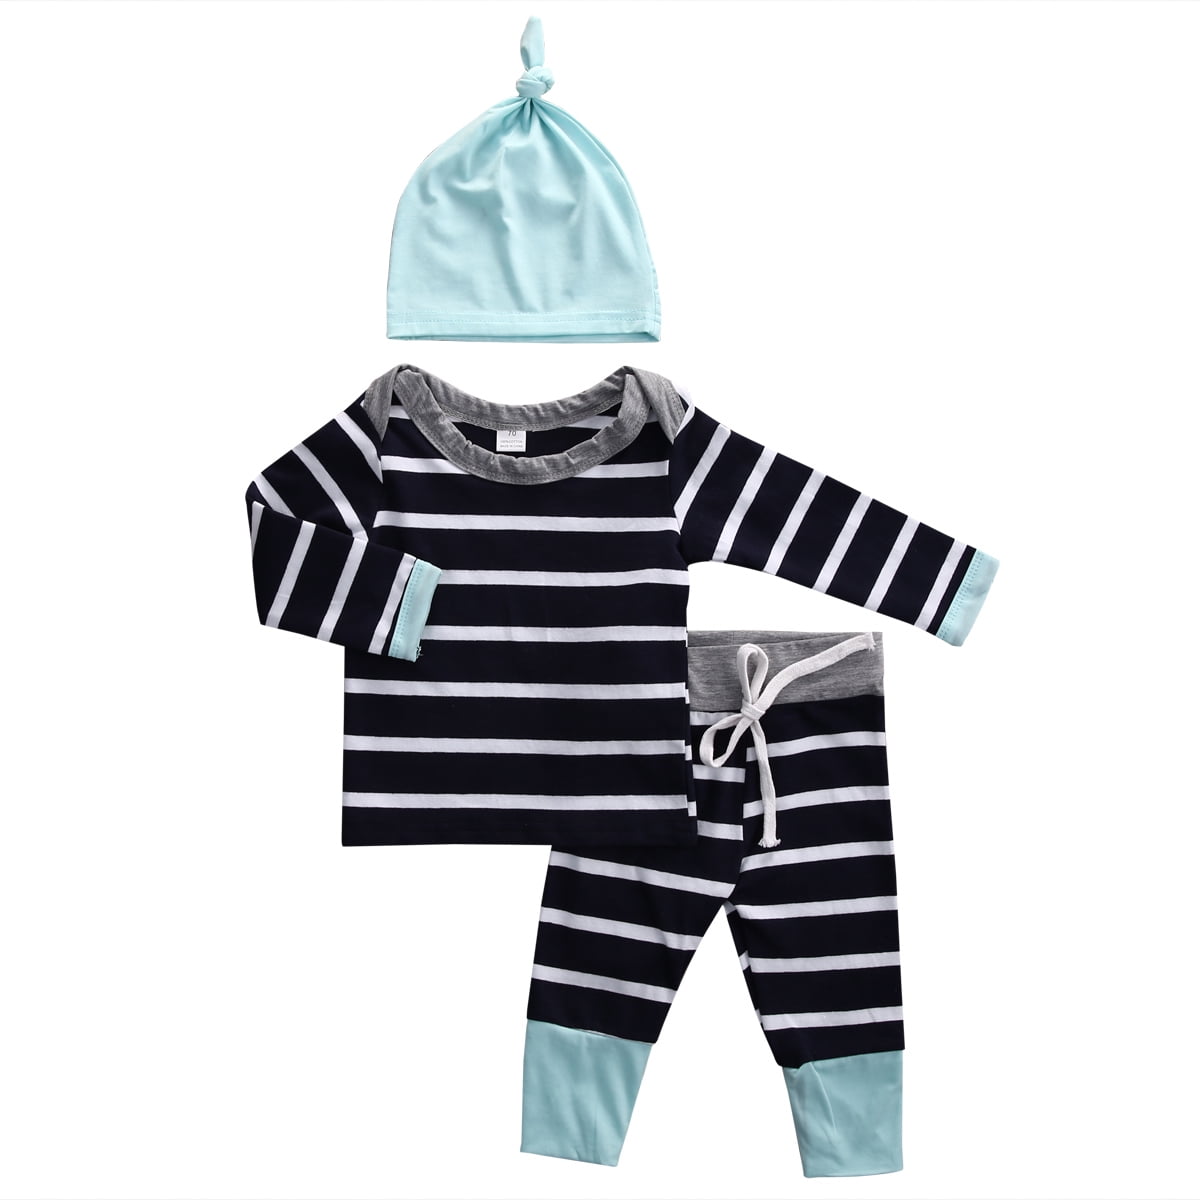 Infant Baby Boys Girls Long Sleeve Striped Hooded Pullover Tops Pants Outfits 